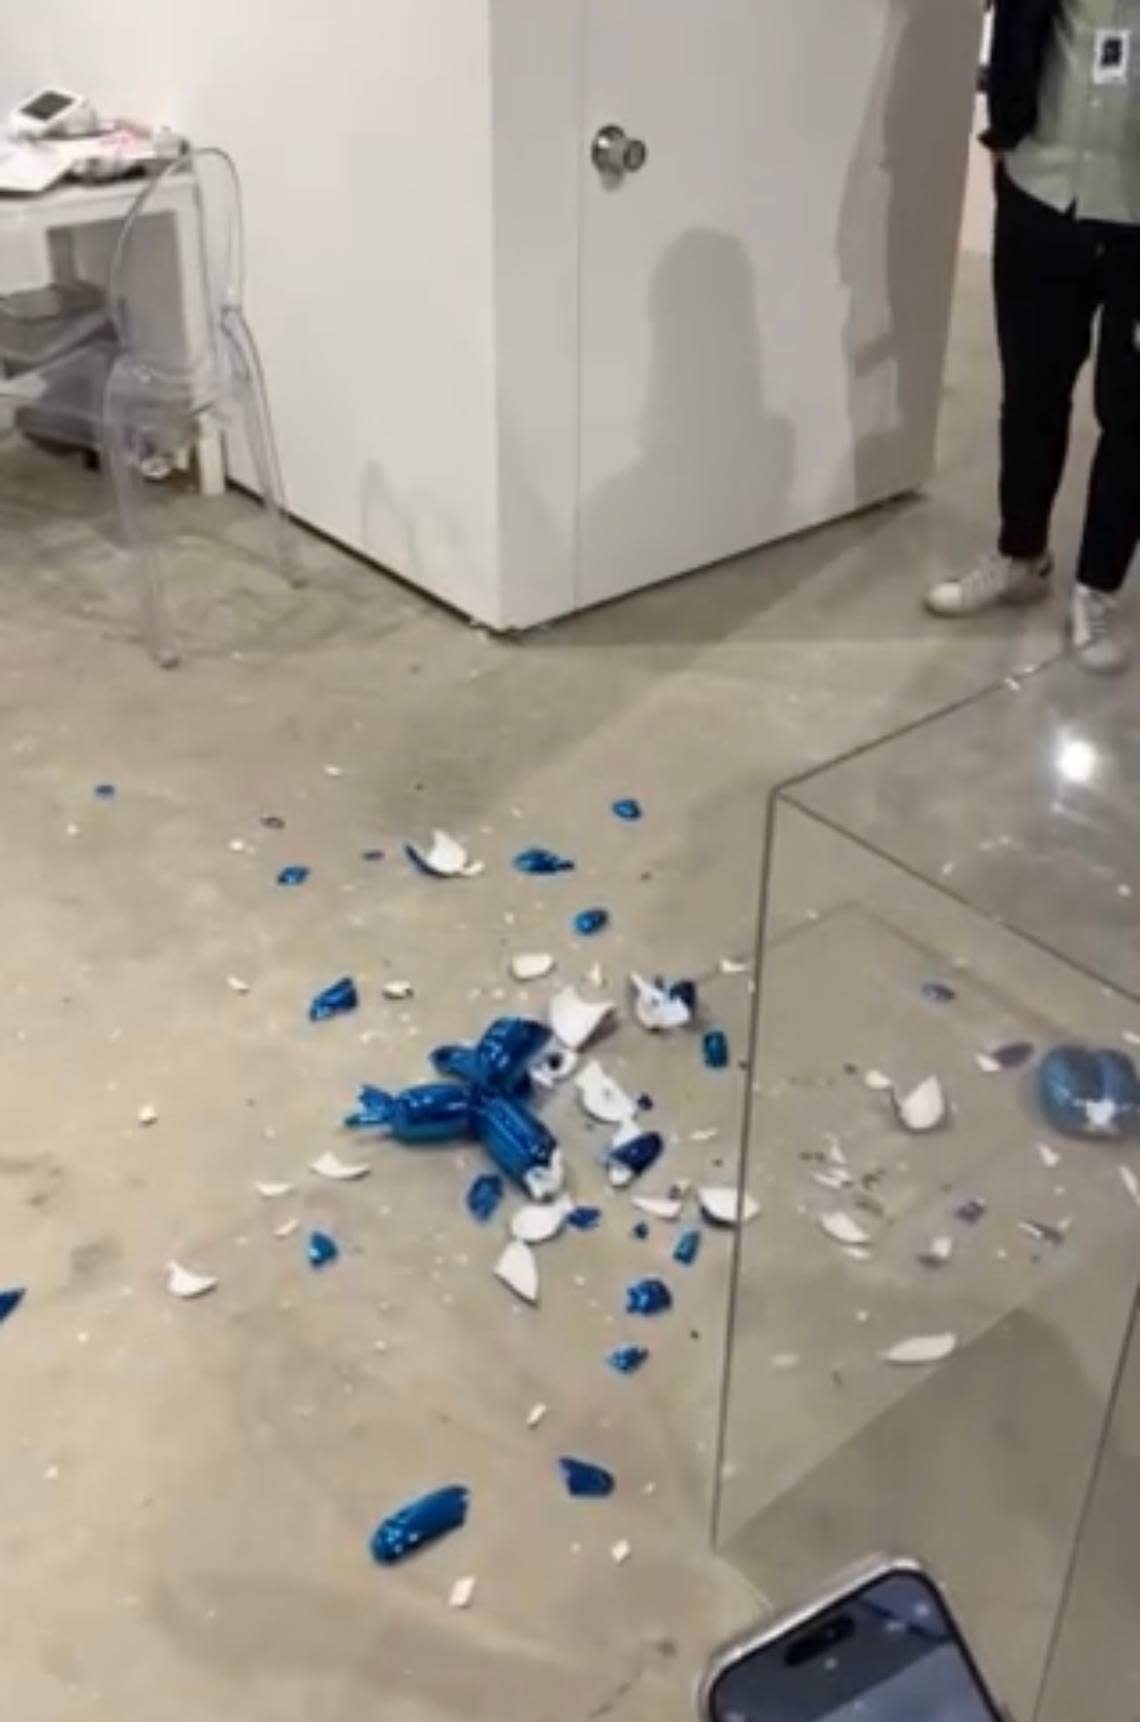 The scene at the Bel-Air Fine Art booth just after a patron of Art Wynwood accidentally destroyed a Jeff Koons sculpture.